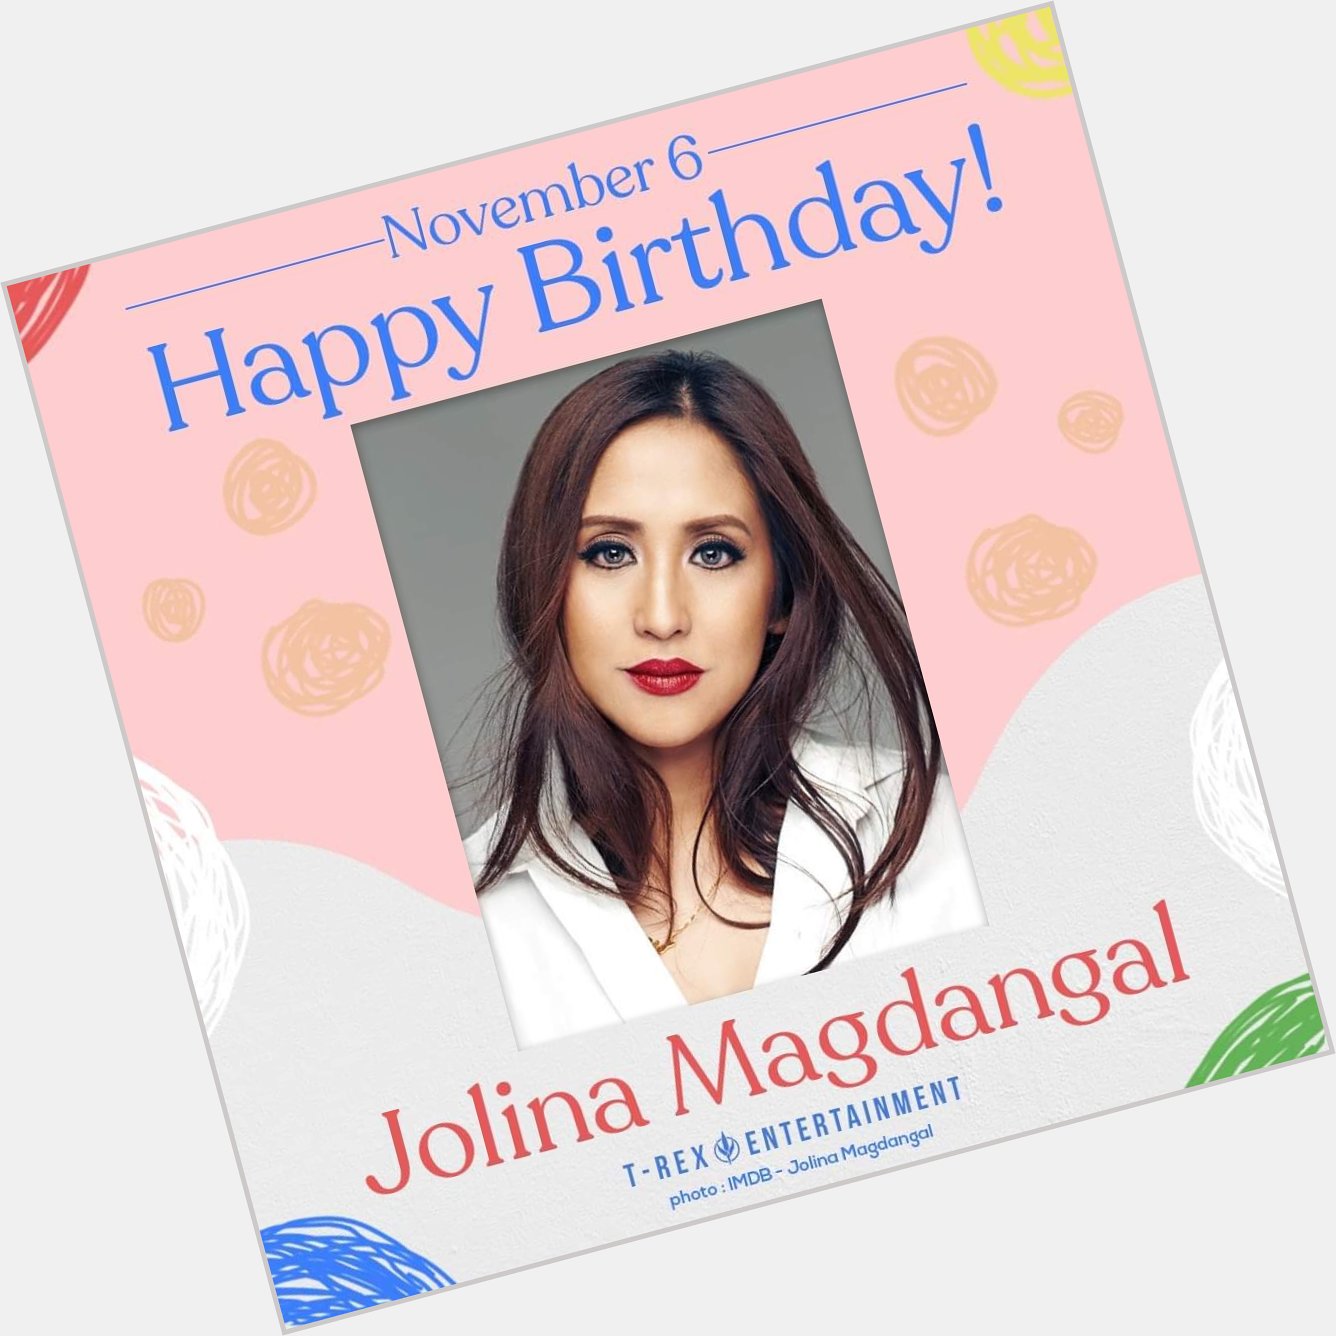 Happy birthday, Jolina Magdangal!

More blessings to come!  